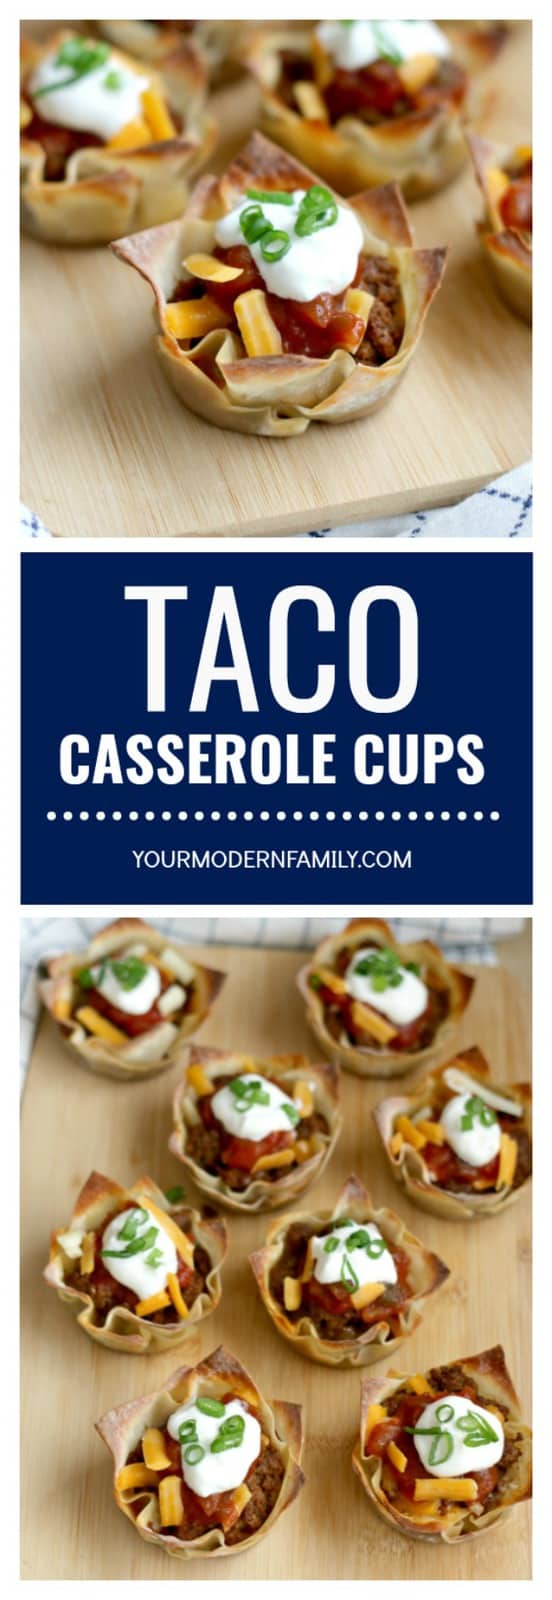 Two photos of Taco Casserole Cups with text between them.